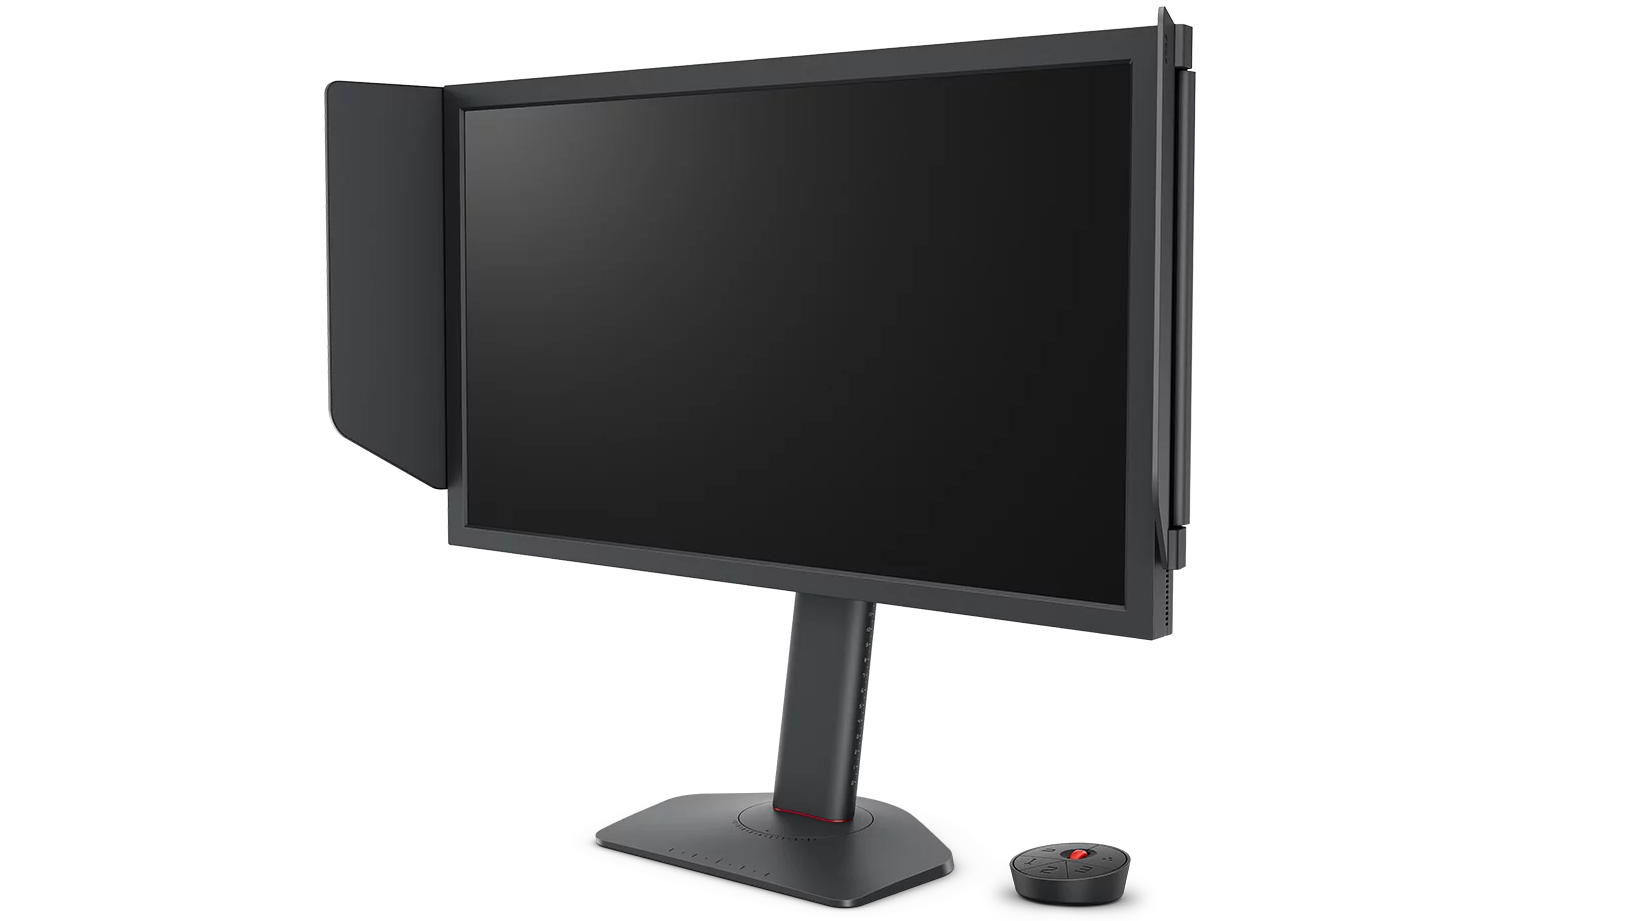 BenQ introduces its first 540 Hz TN monitor, a month after Asus